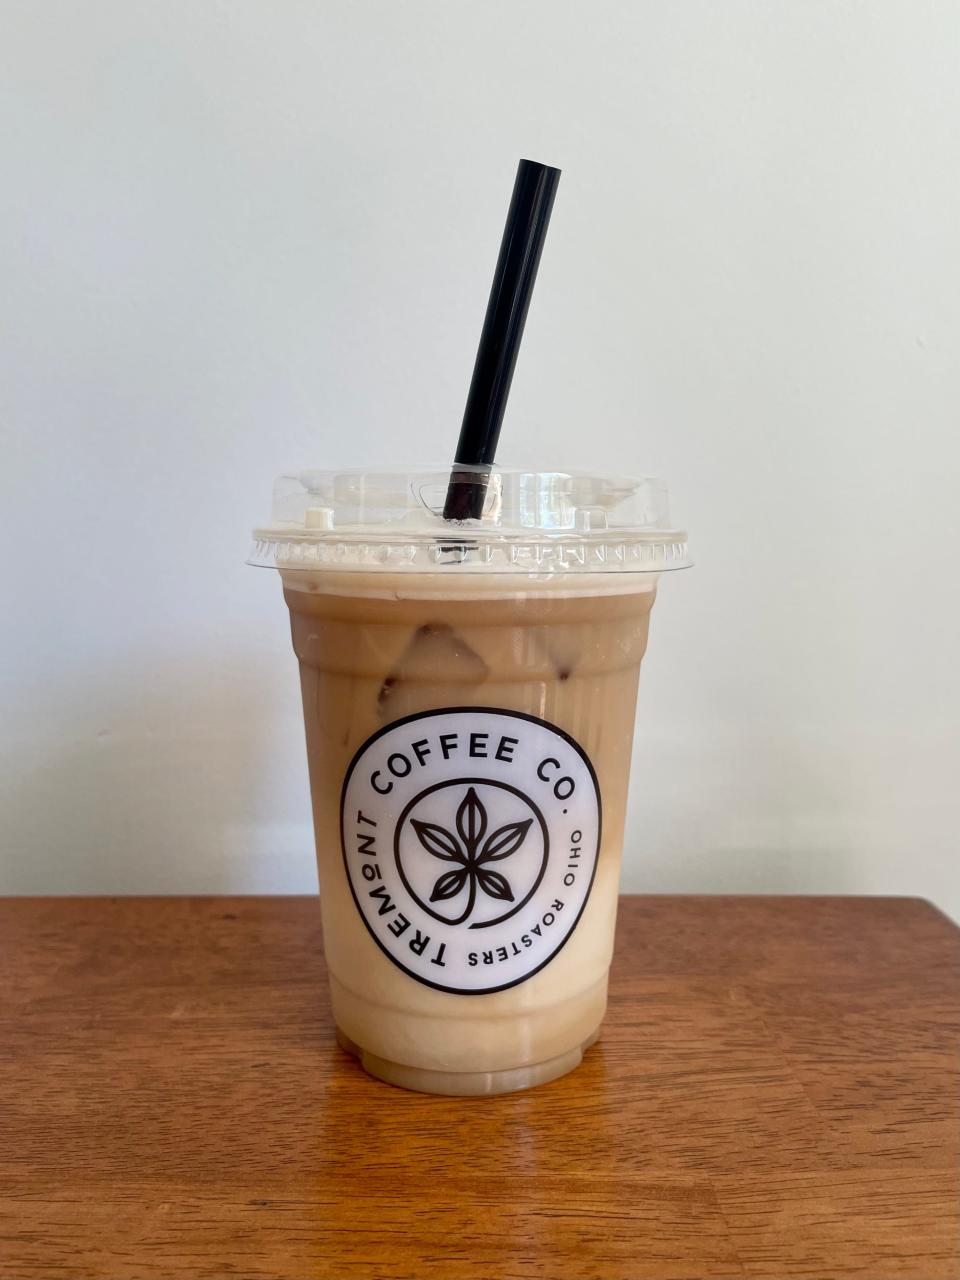 The Nitro Caramel Macchiato is a cold brew from Tremont Coffee Co. that features nitro cold brew, 2% milk and vanilla and caramel flavor.